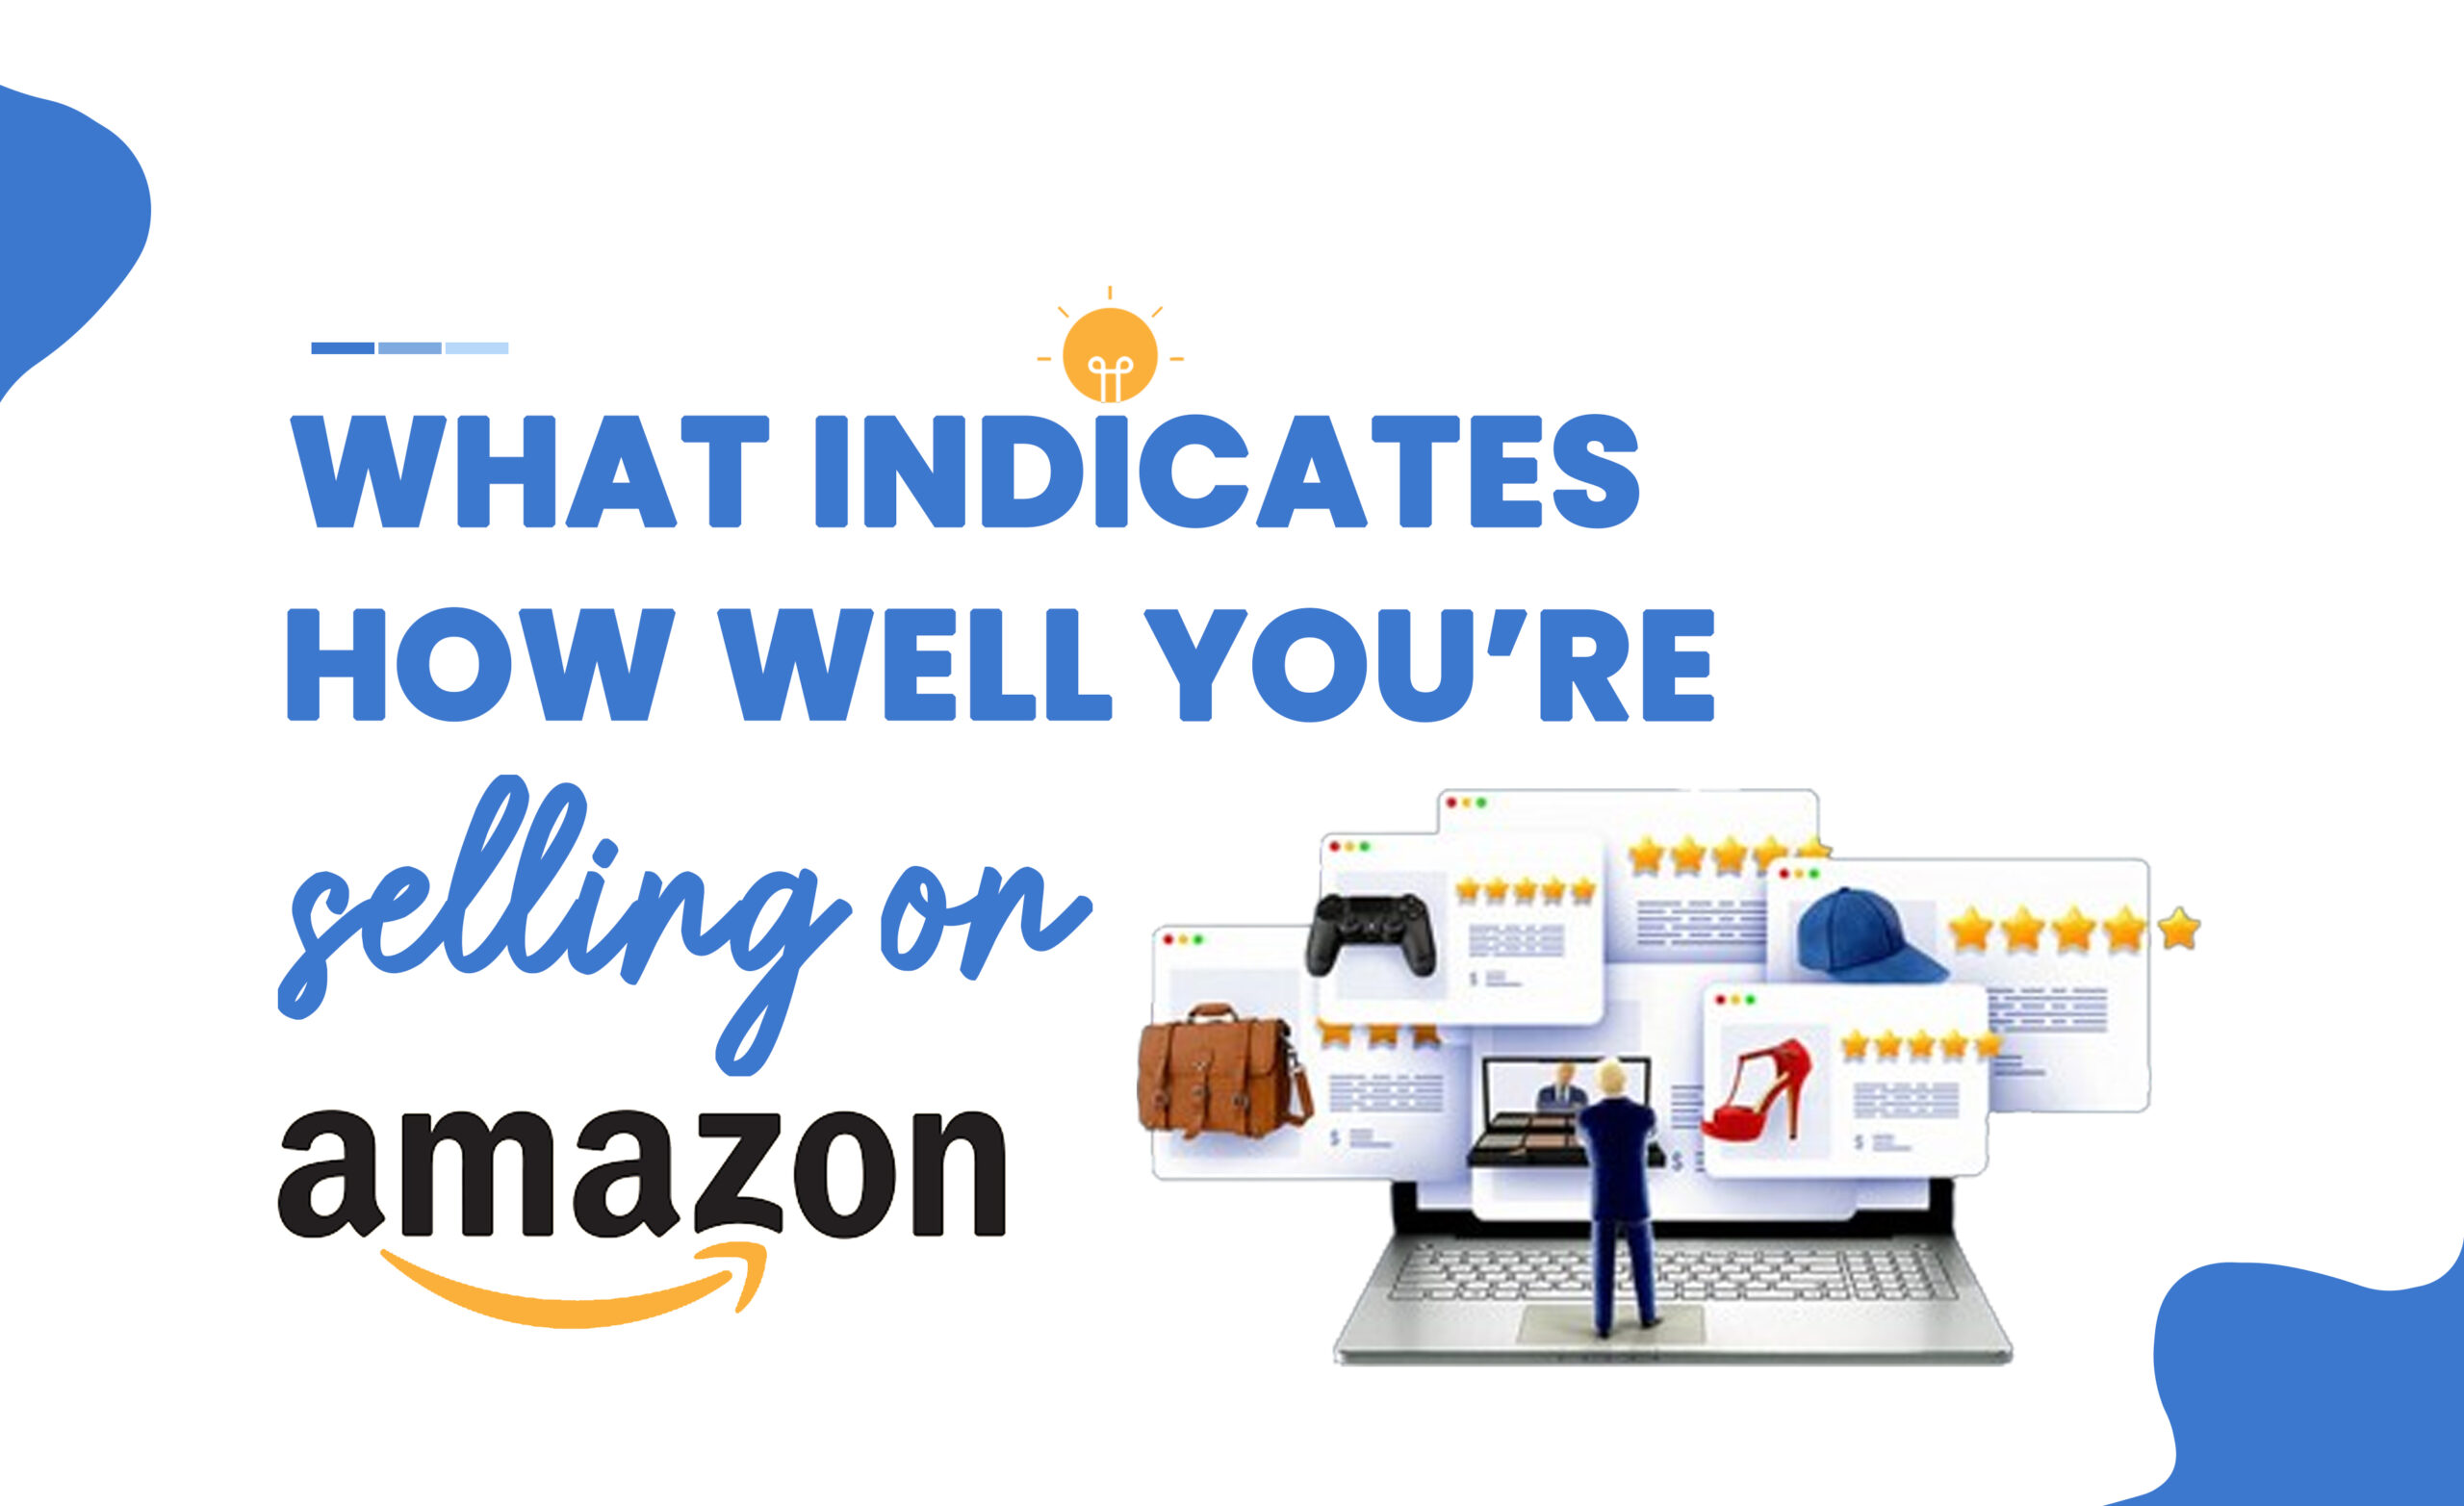 What Indicates How Well Your’re Selling on Amazon ?